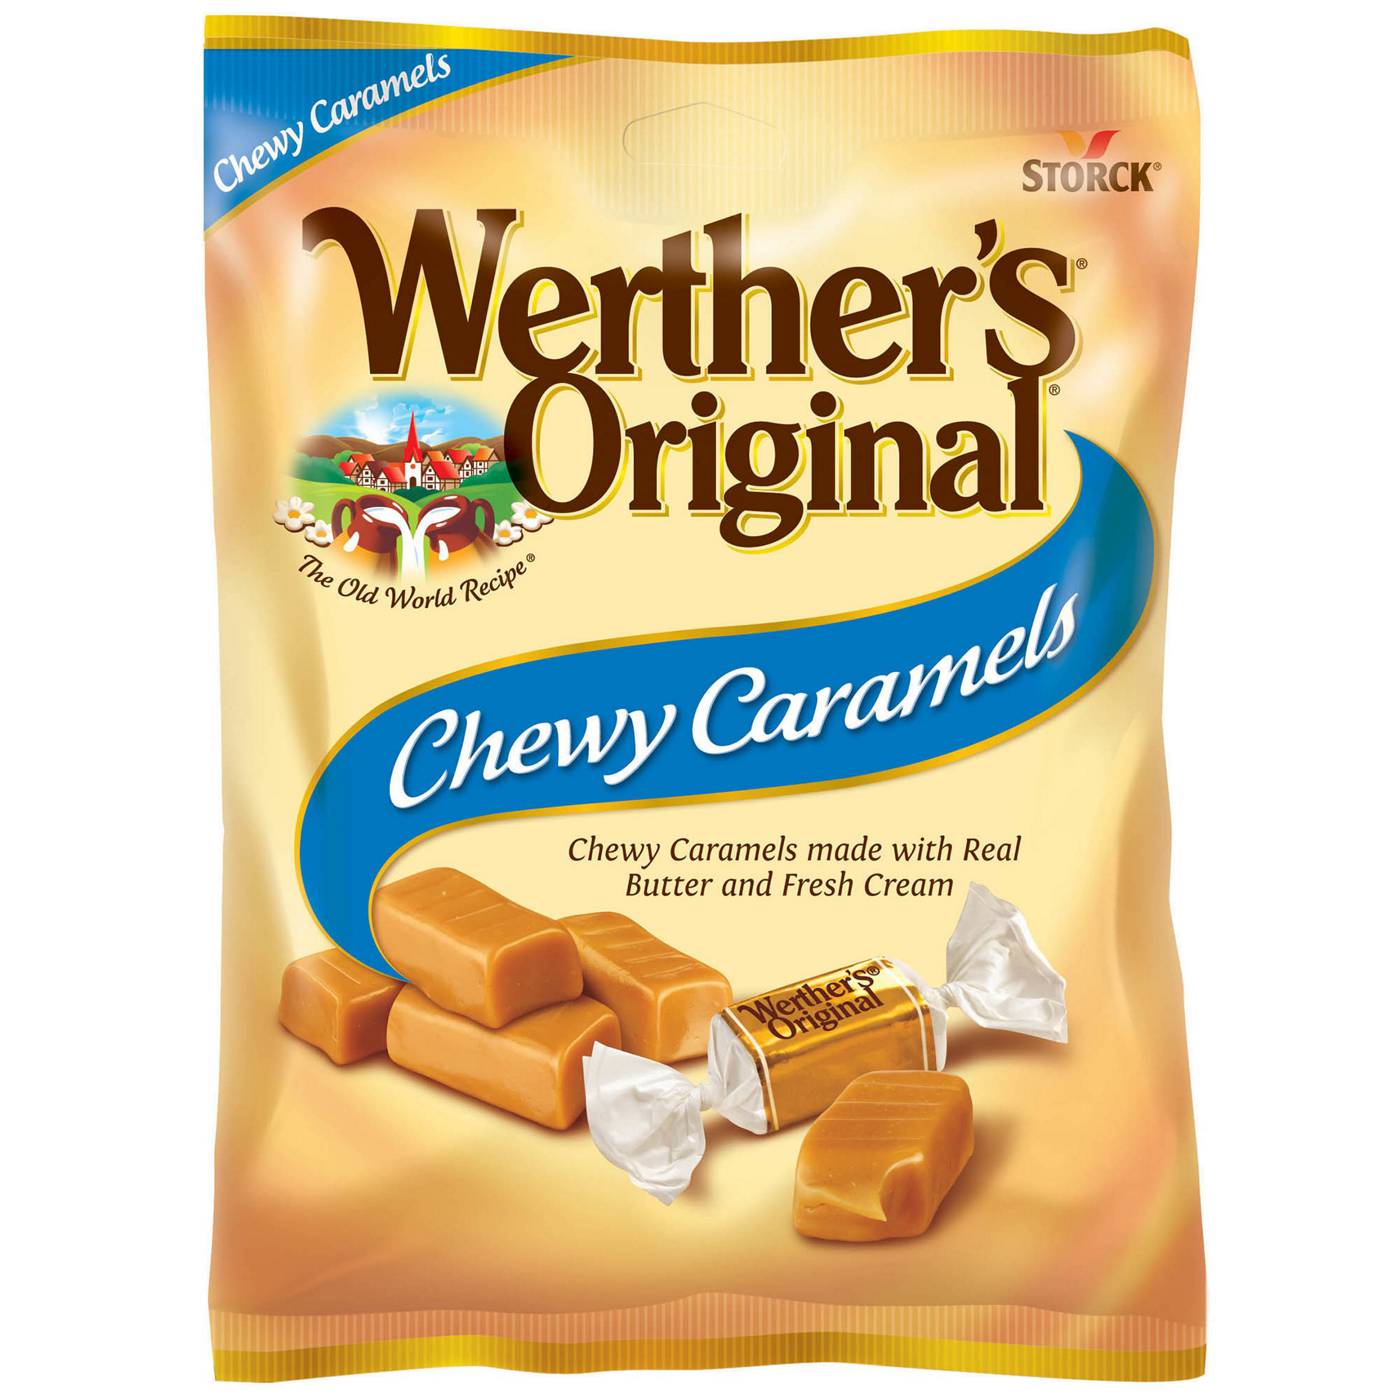 Werther's Original Chewy Caramel Candy; image 1 of 6